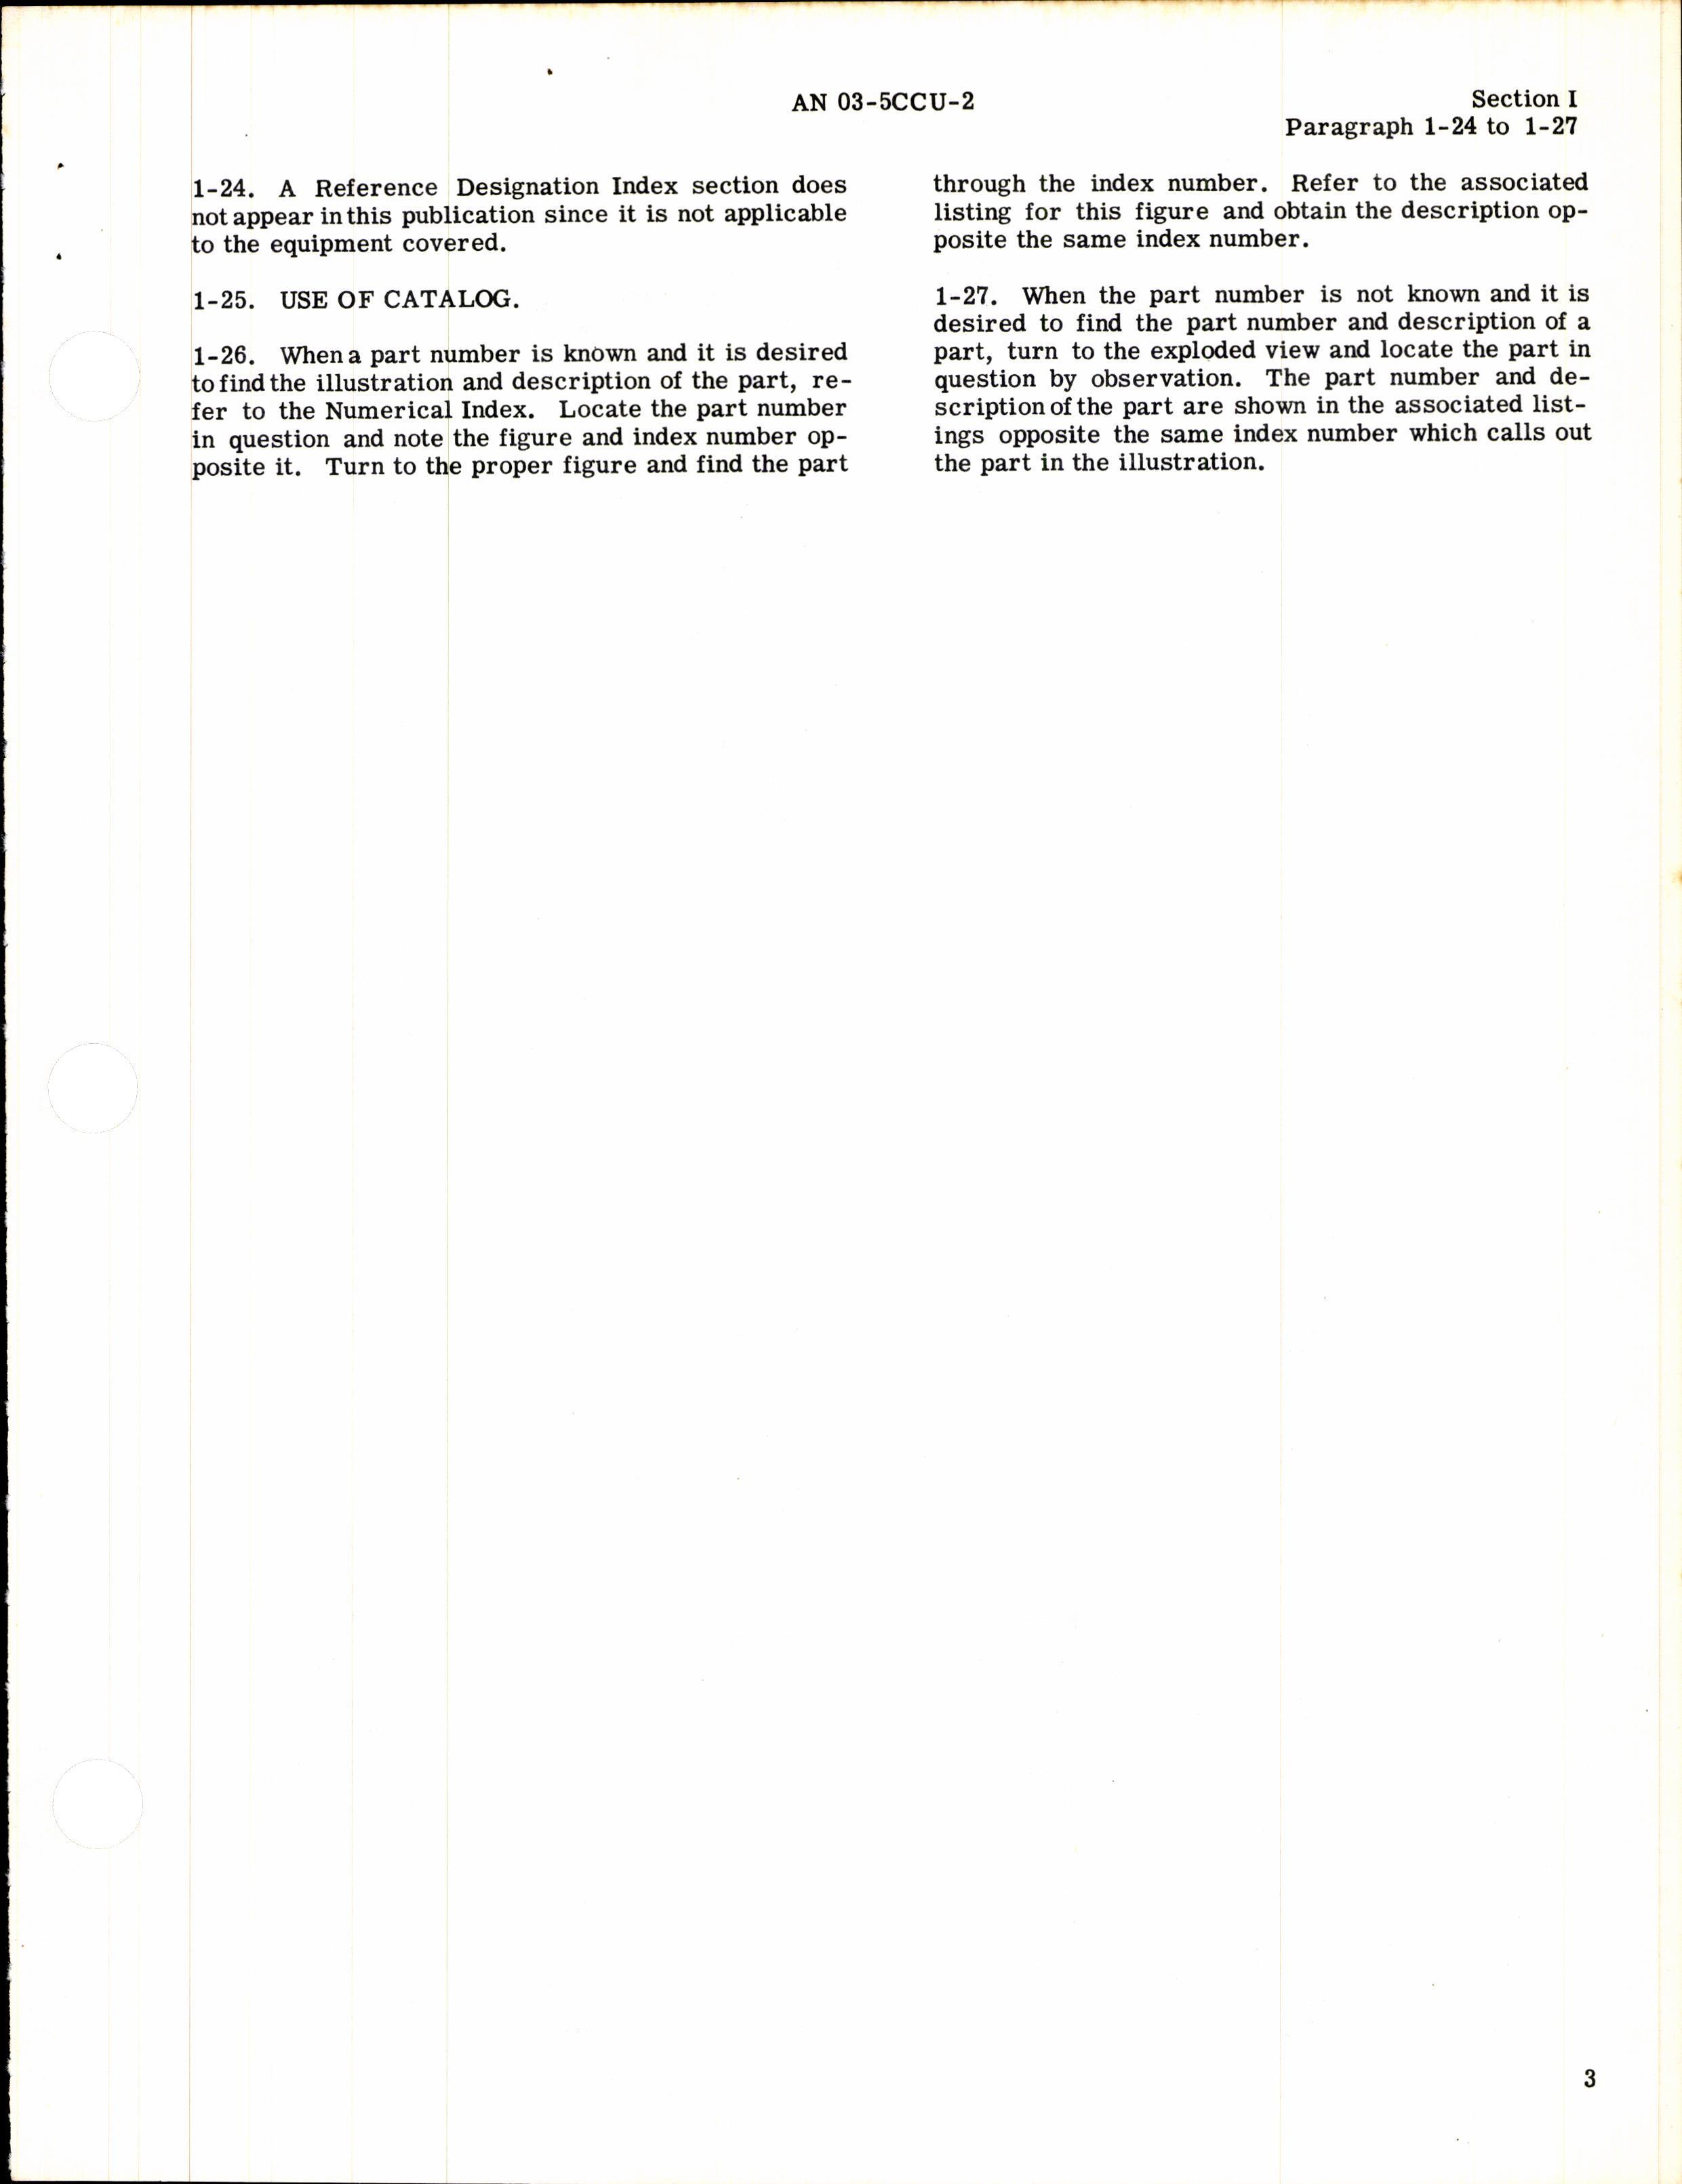 Sample page 5 from AirCorps Library document: Illustrated Parts Catalog for Lear Fractional Horsepower Motors